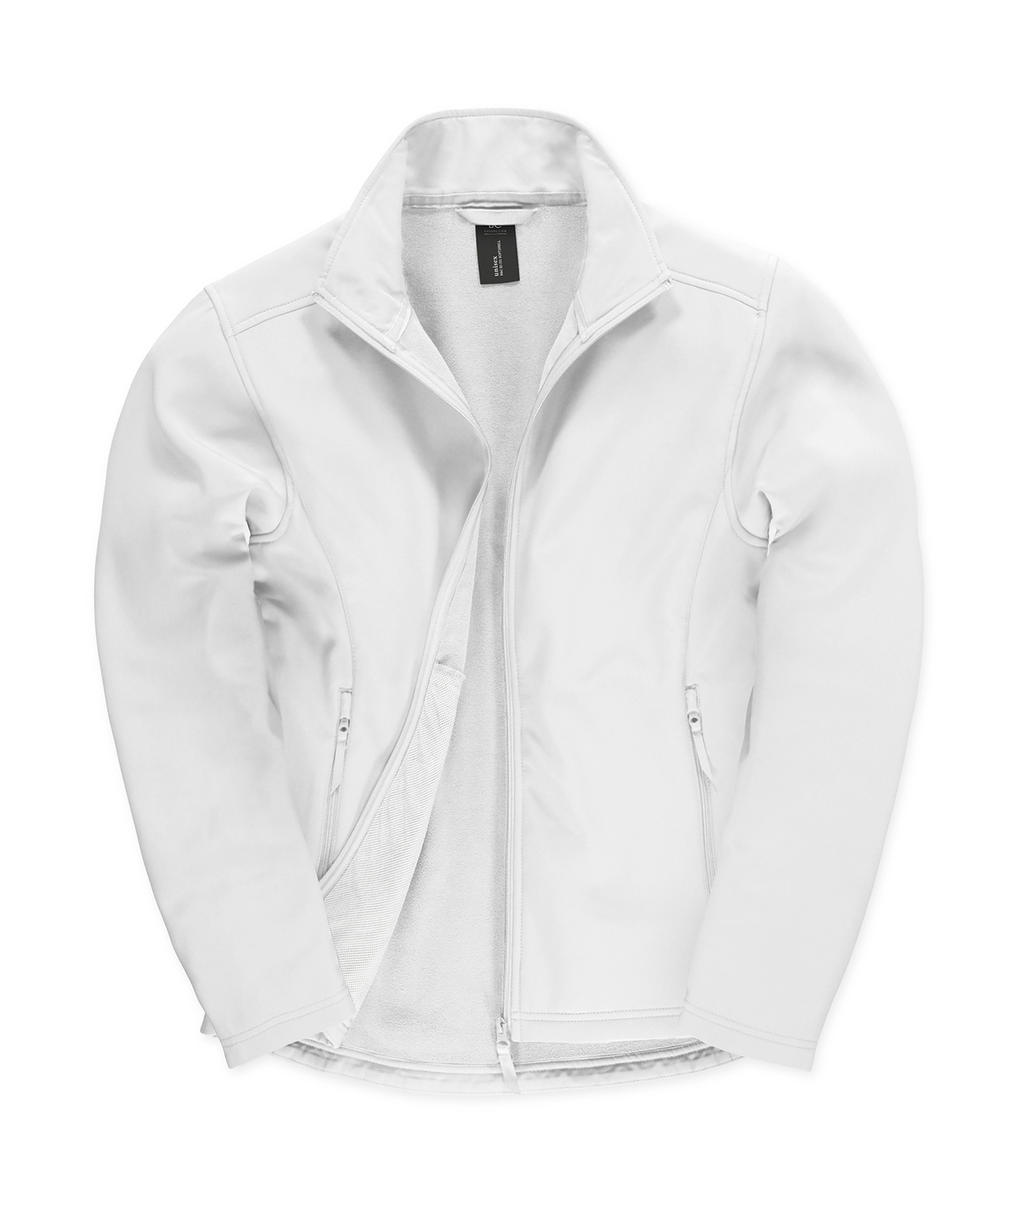  ID.701 Softshell Jacket in Farbe White/White